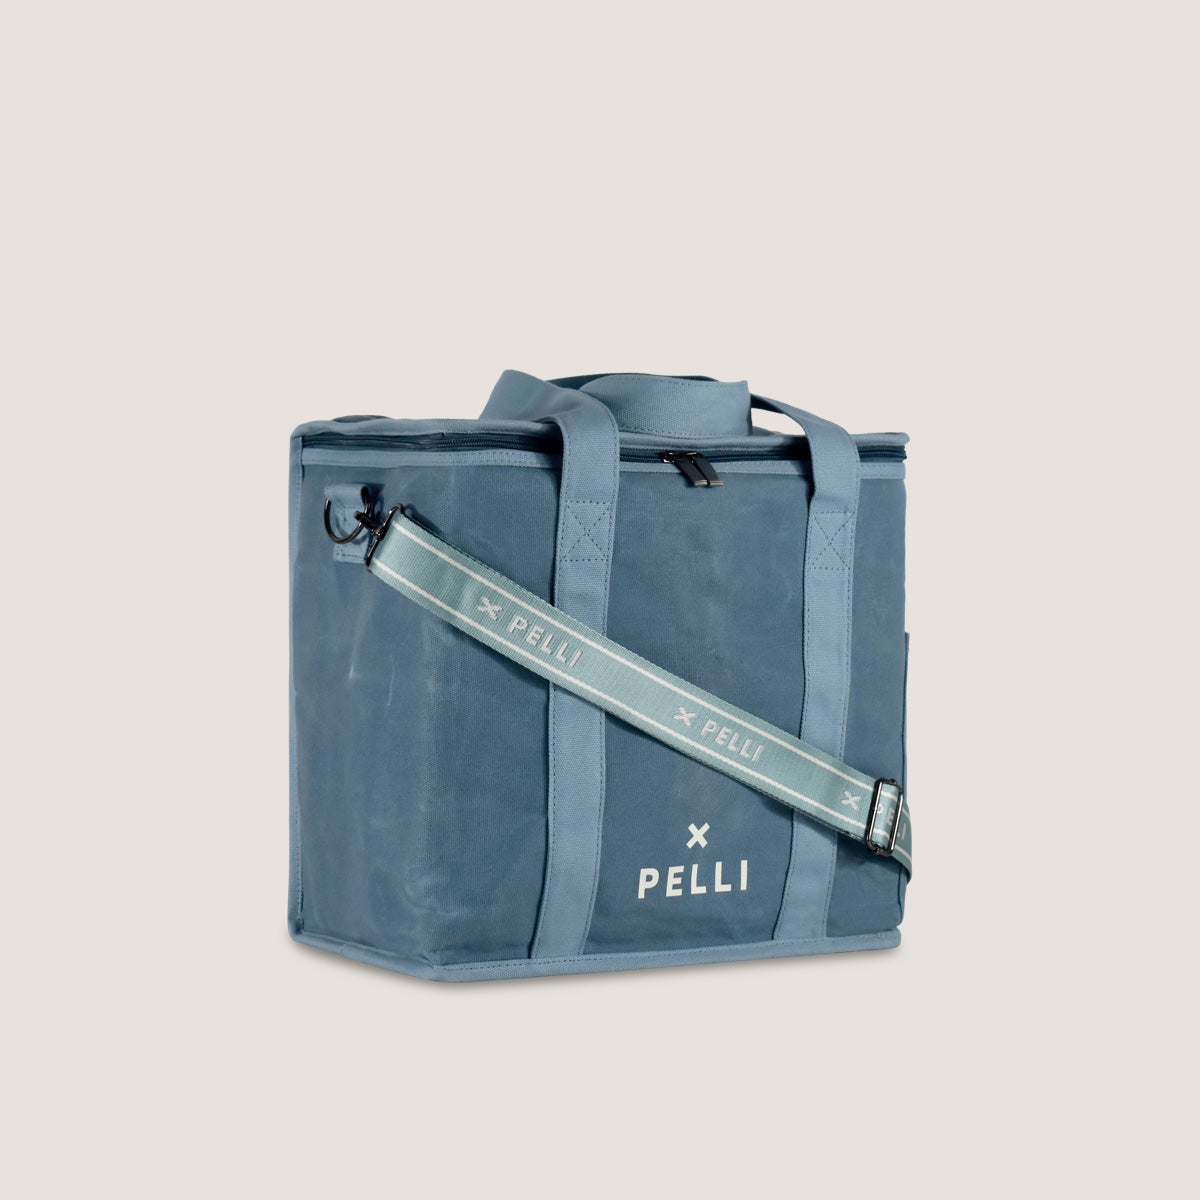 OK Chill Crossbody - Waxed Canvas Medium Cooler Bag with Shoulder Strap in Dusty Blue